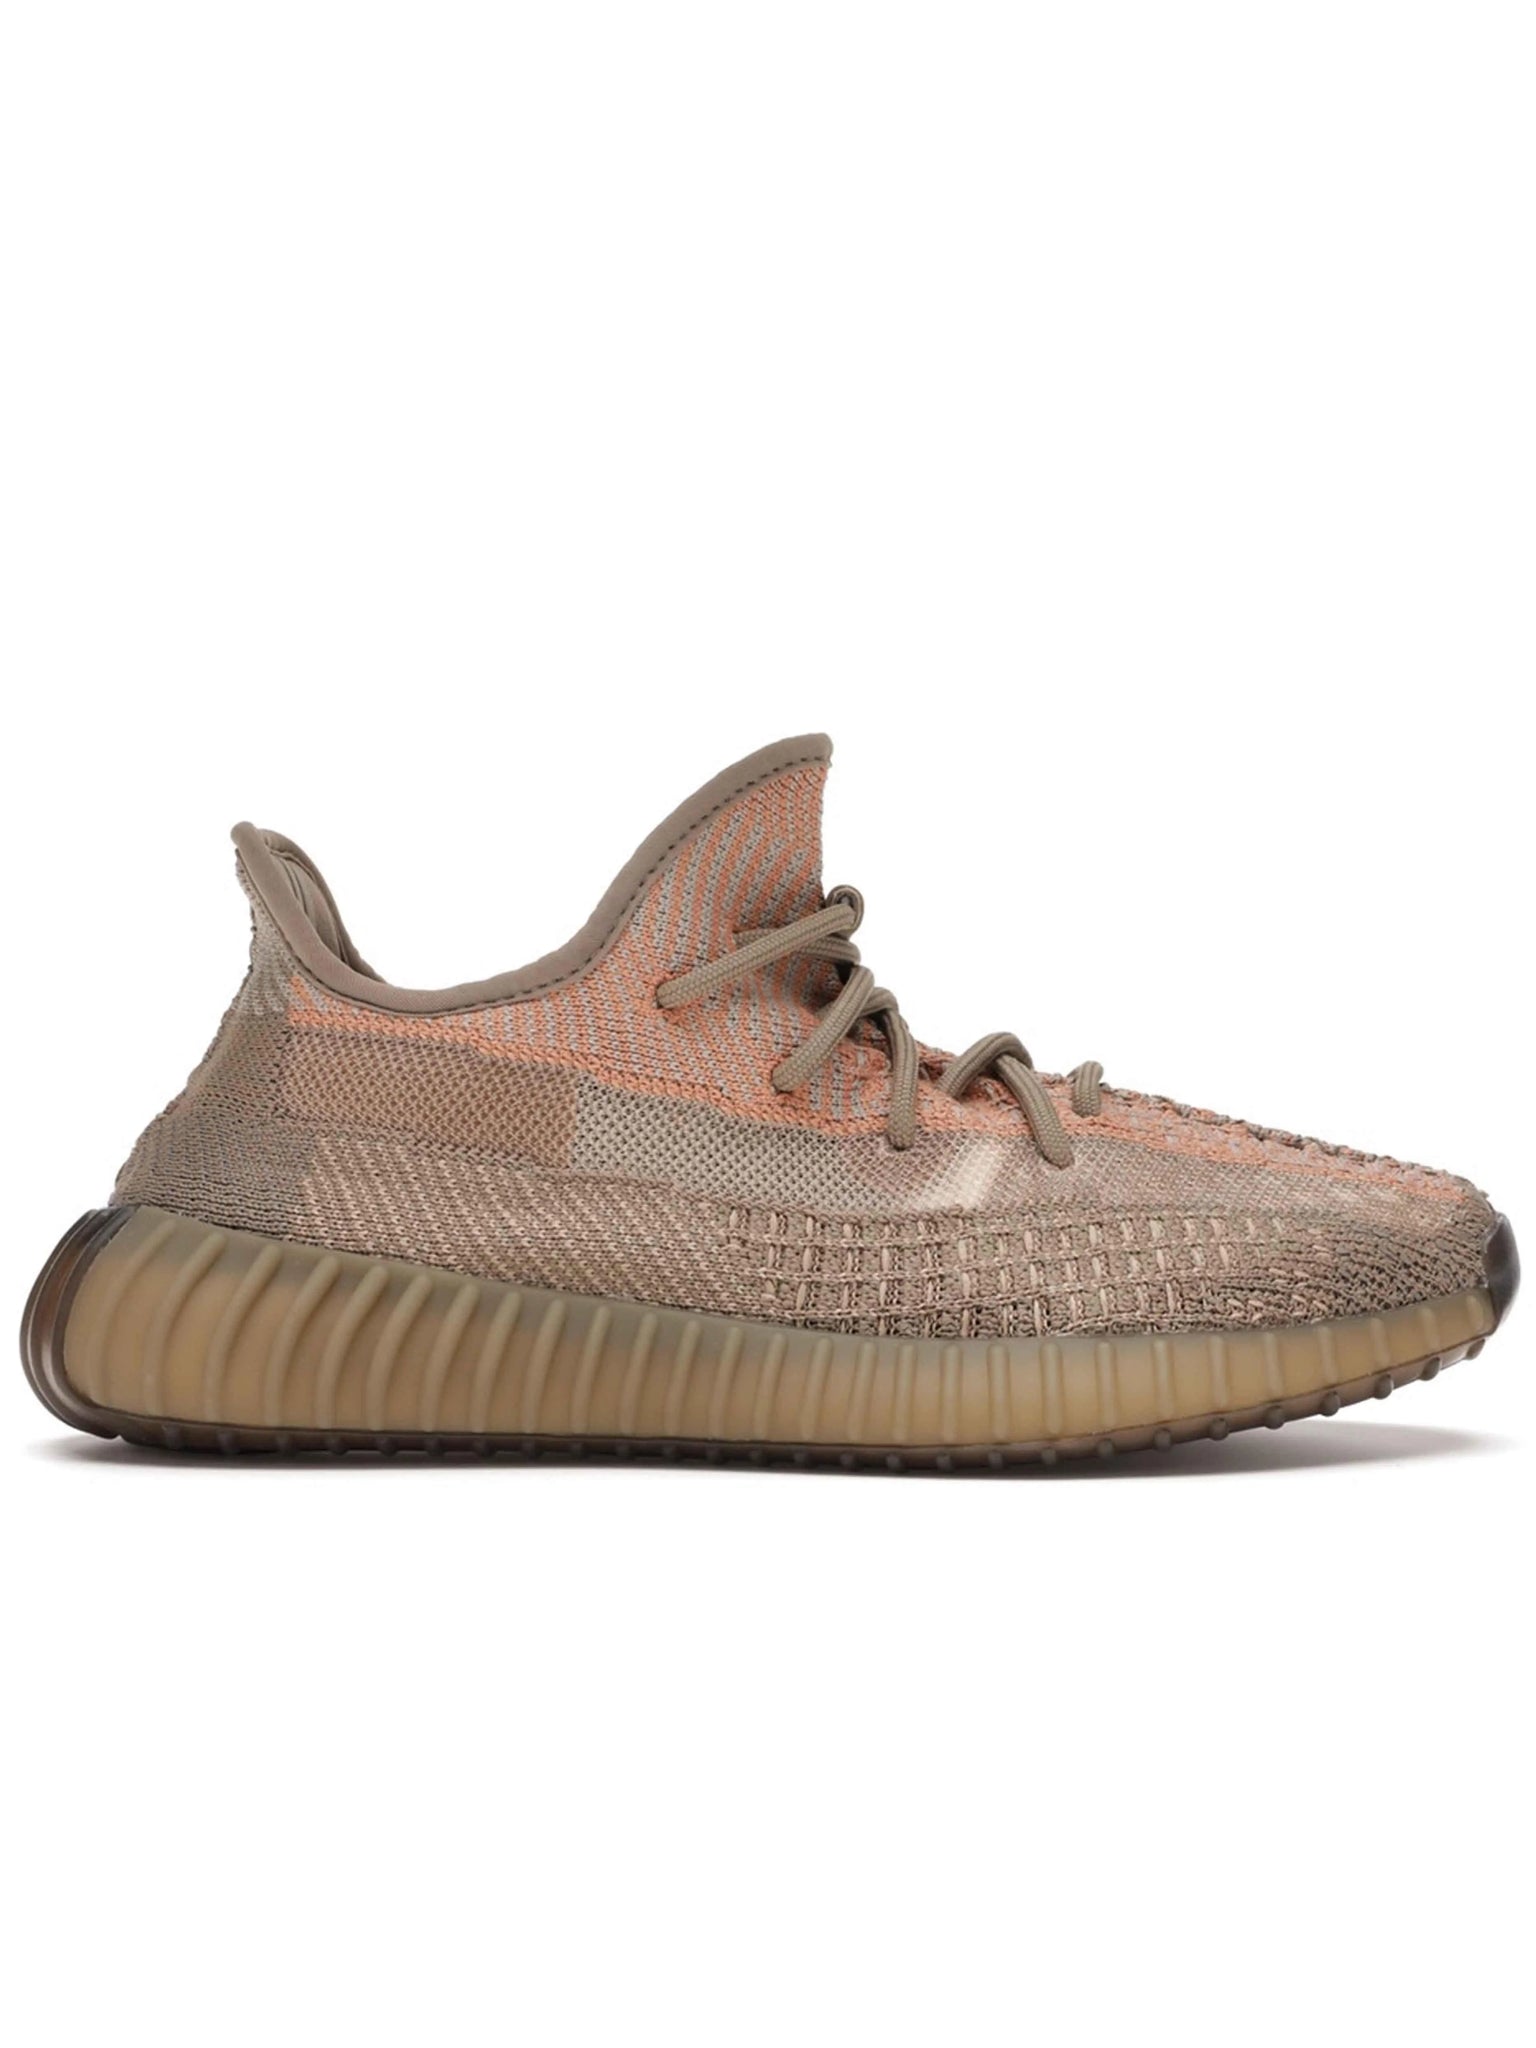 Adidas Yeezy Boost 350 V2 Sand Taupe Prior